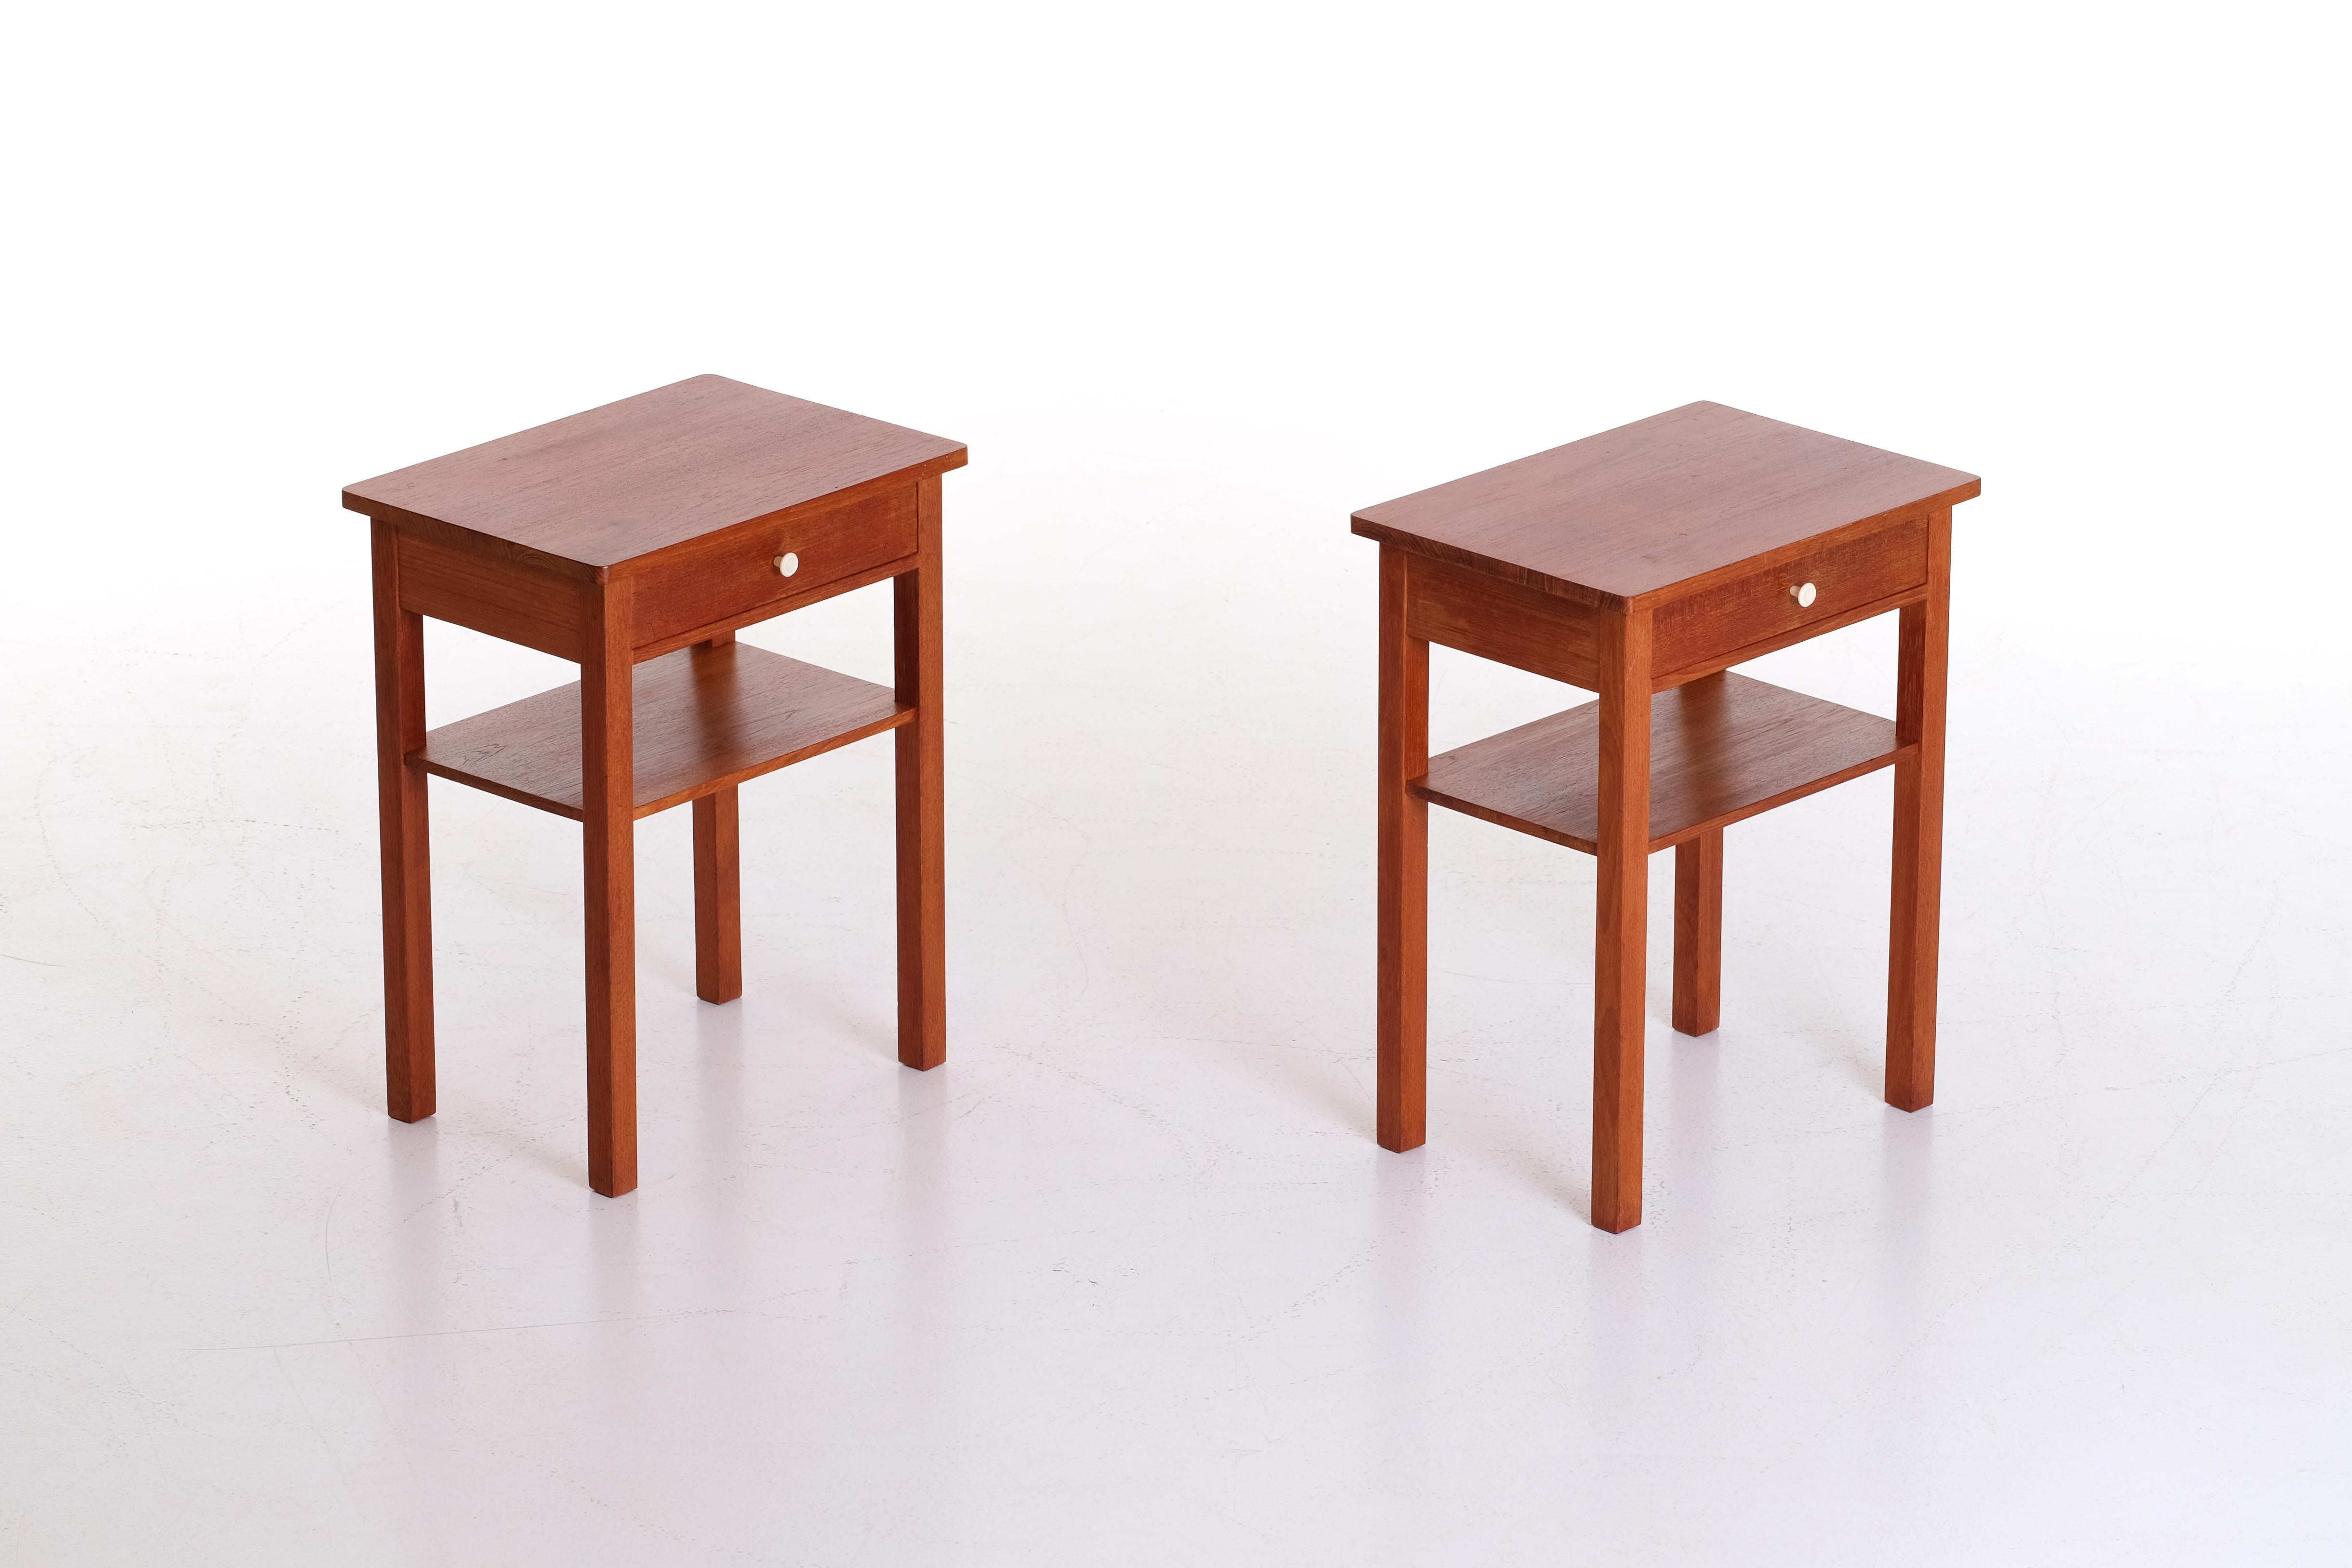 Pair of Swedish bedside tables from the 1960s.
Teak and white bakelite knob.